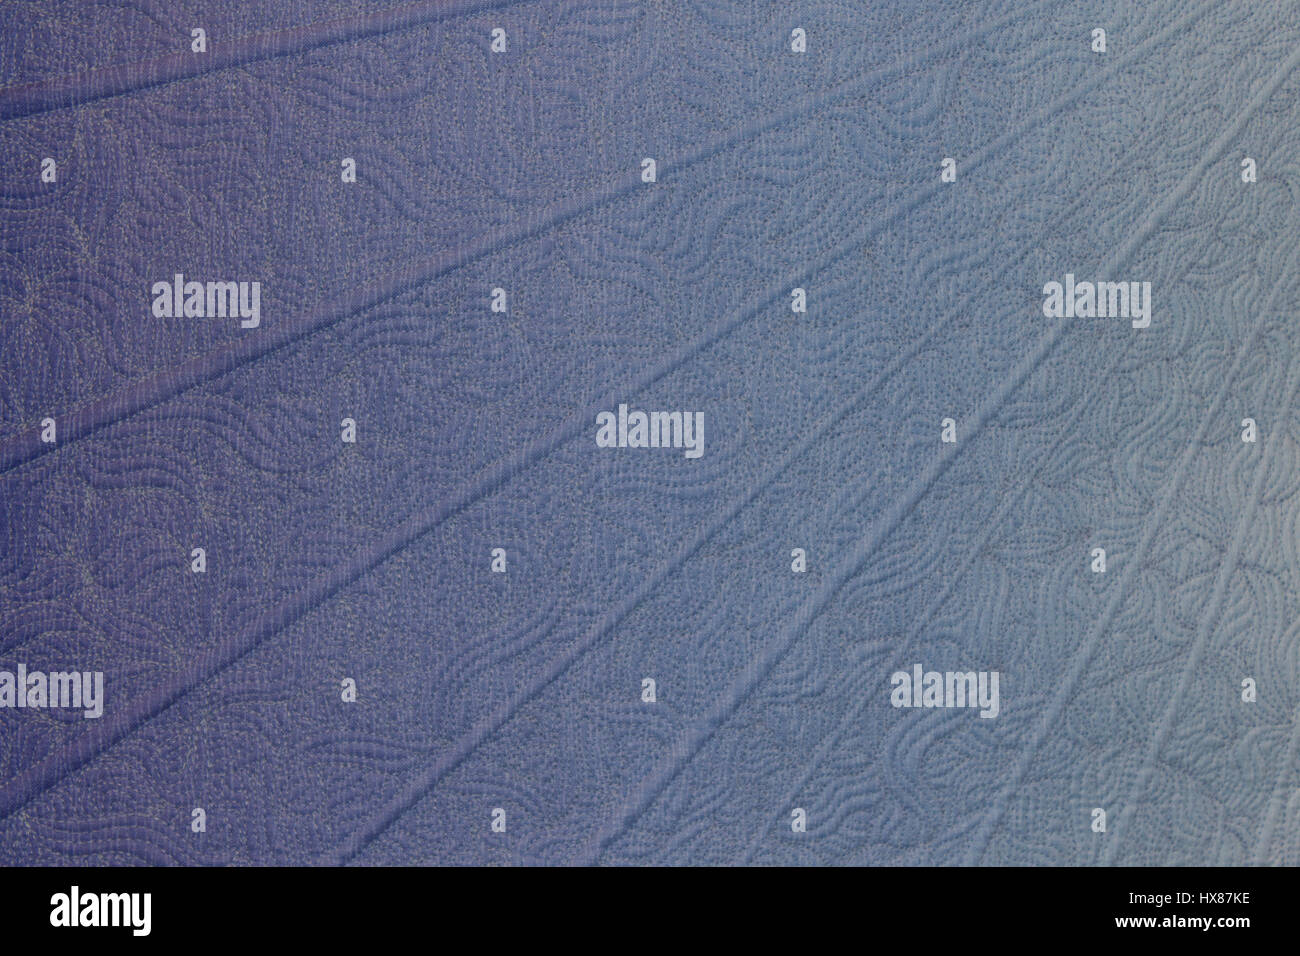 Portion of quilted blue banner Stock Photo